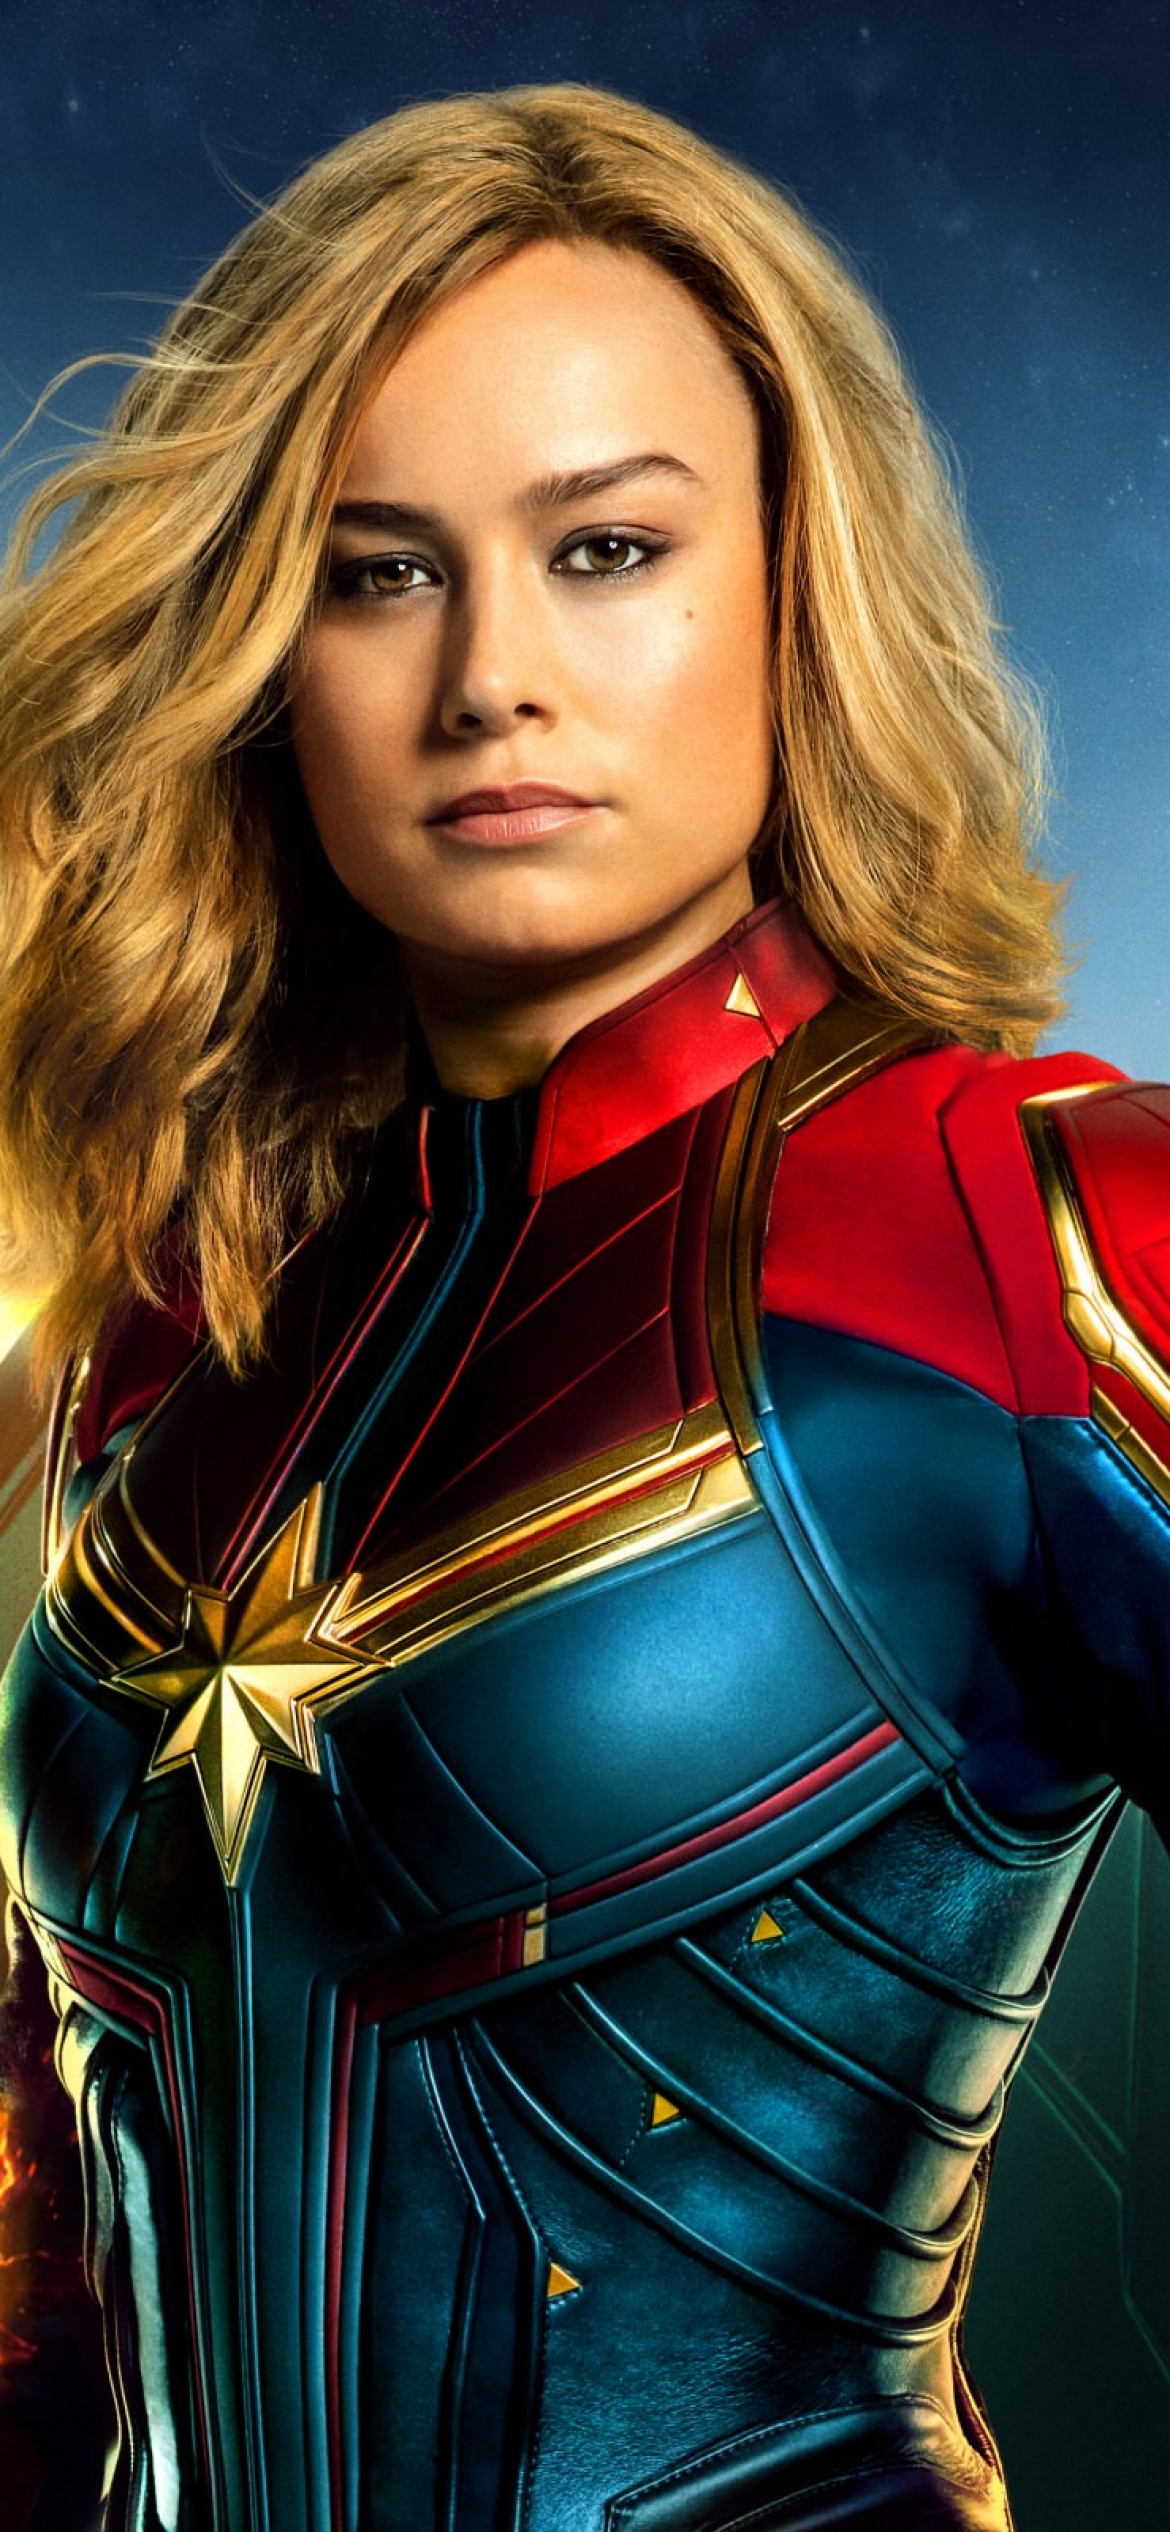 Download Captain Marvel 2019 Download Ultra Hd 4k Wallpapers In